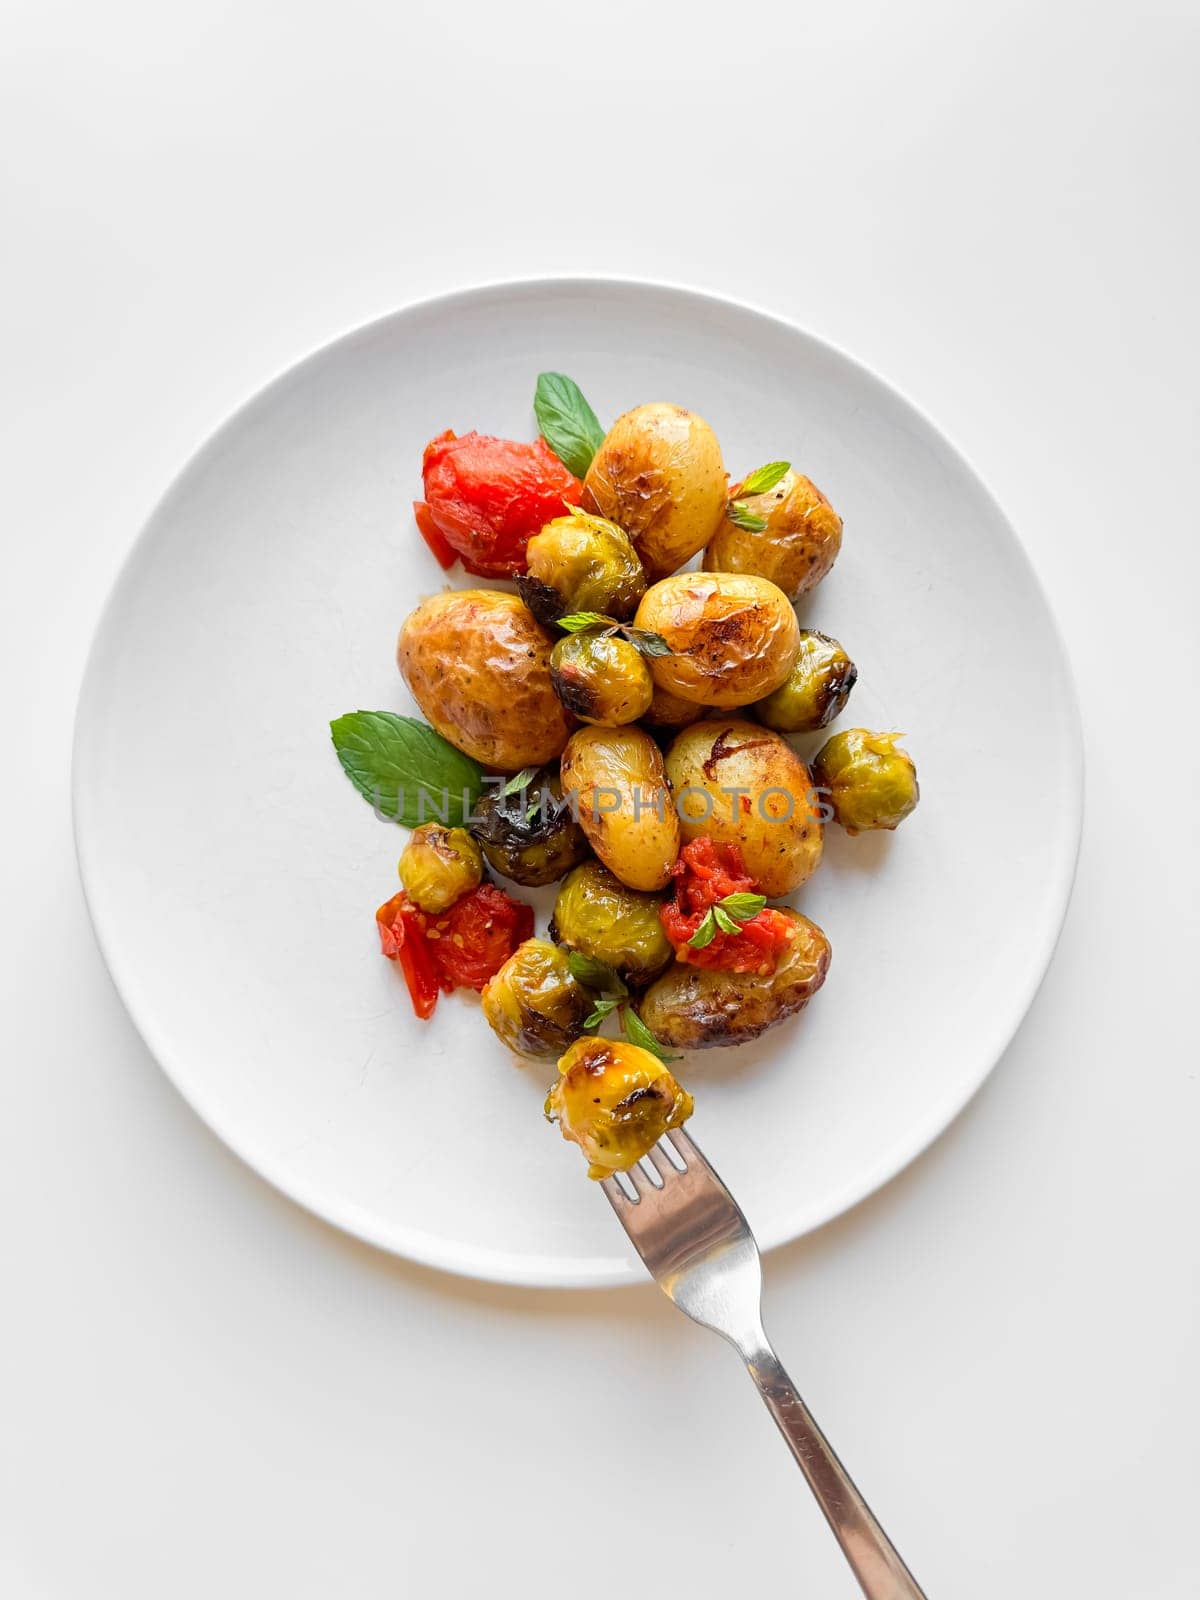 Roasted new potatoes and Brussels sprouts with cherry tomatoes and basil on white plate, healthy eating concept for weight loss. by Lunnica